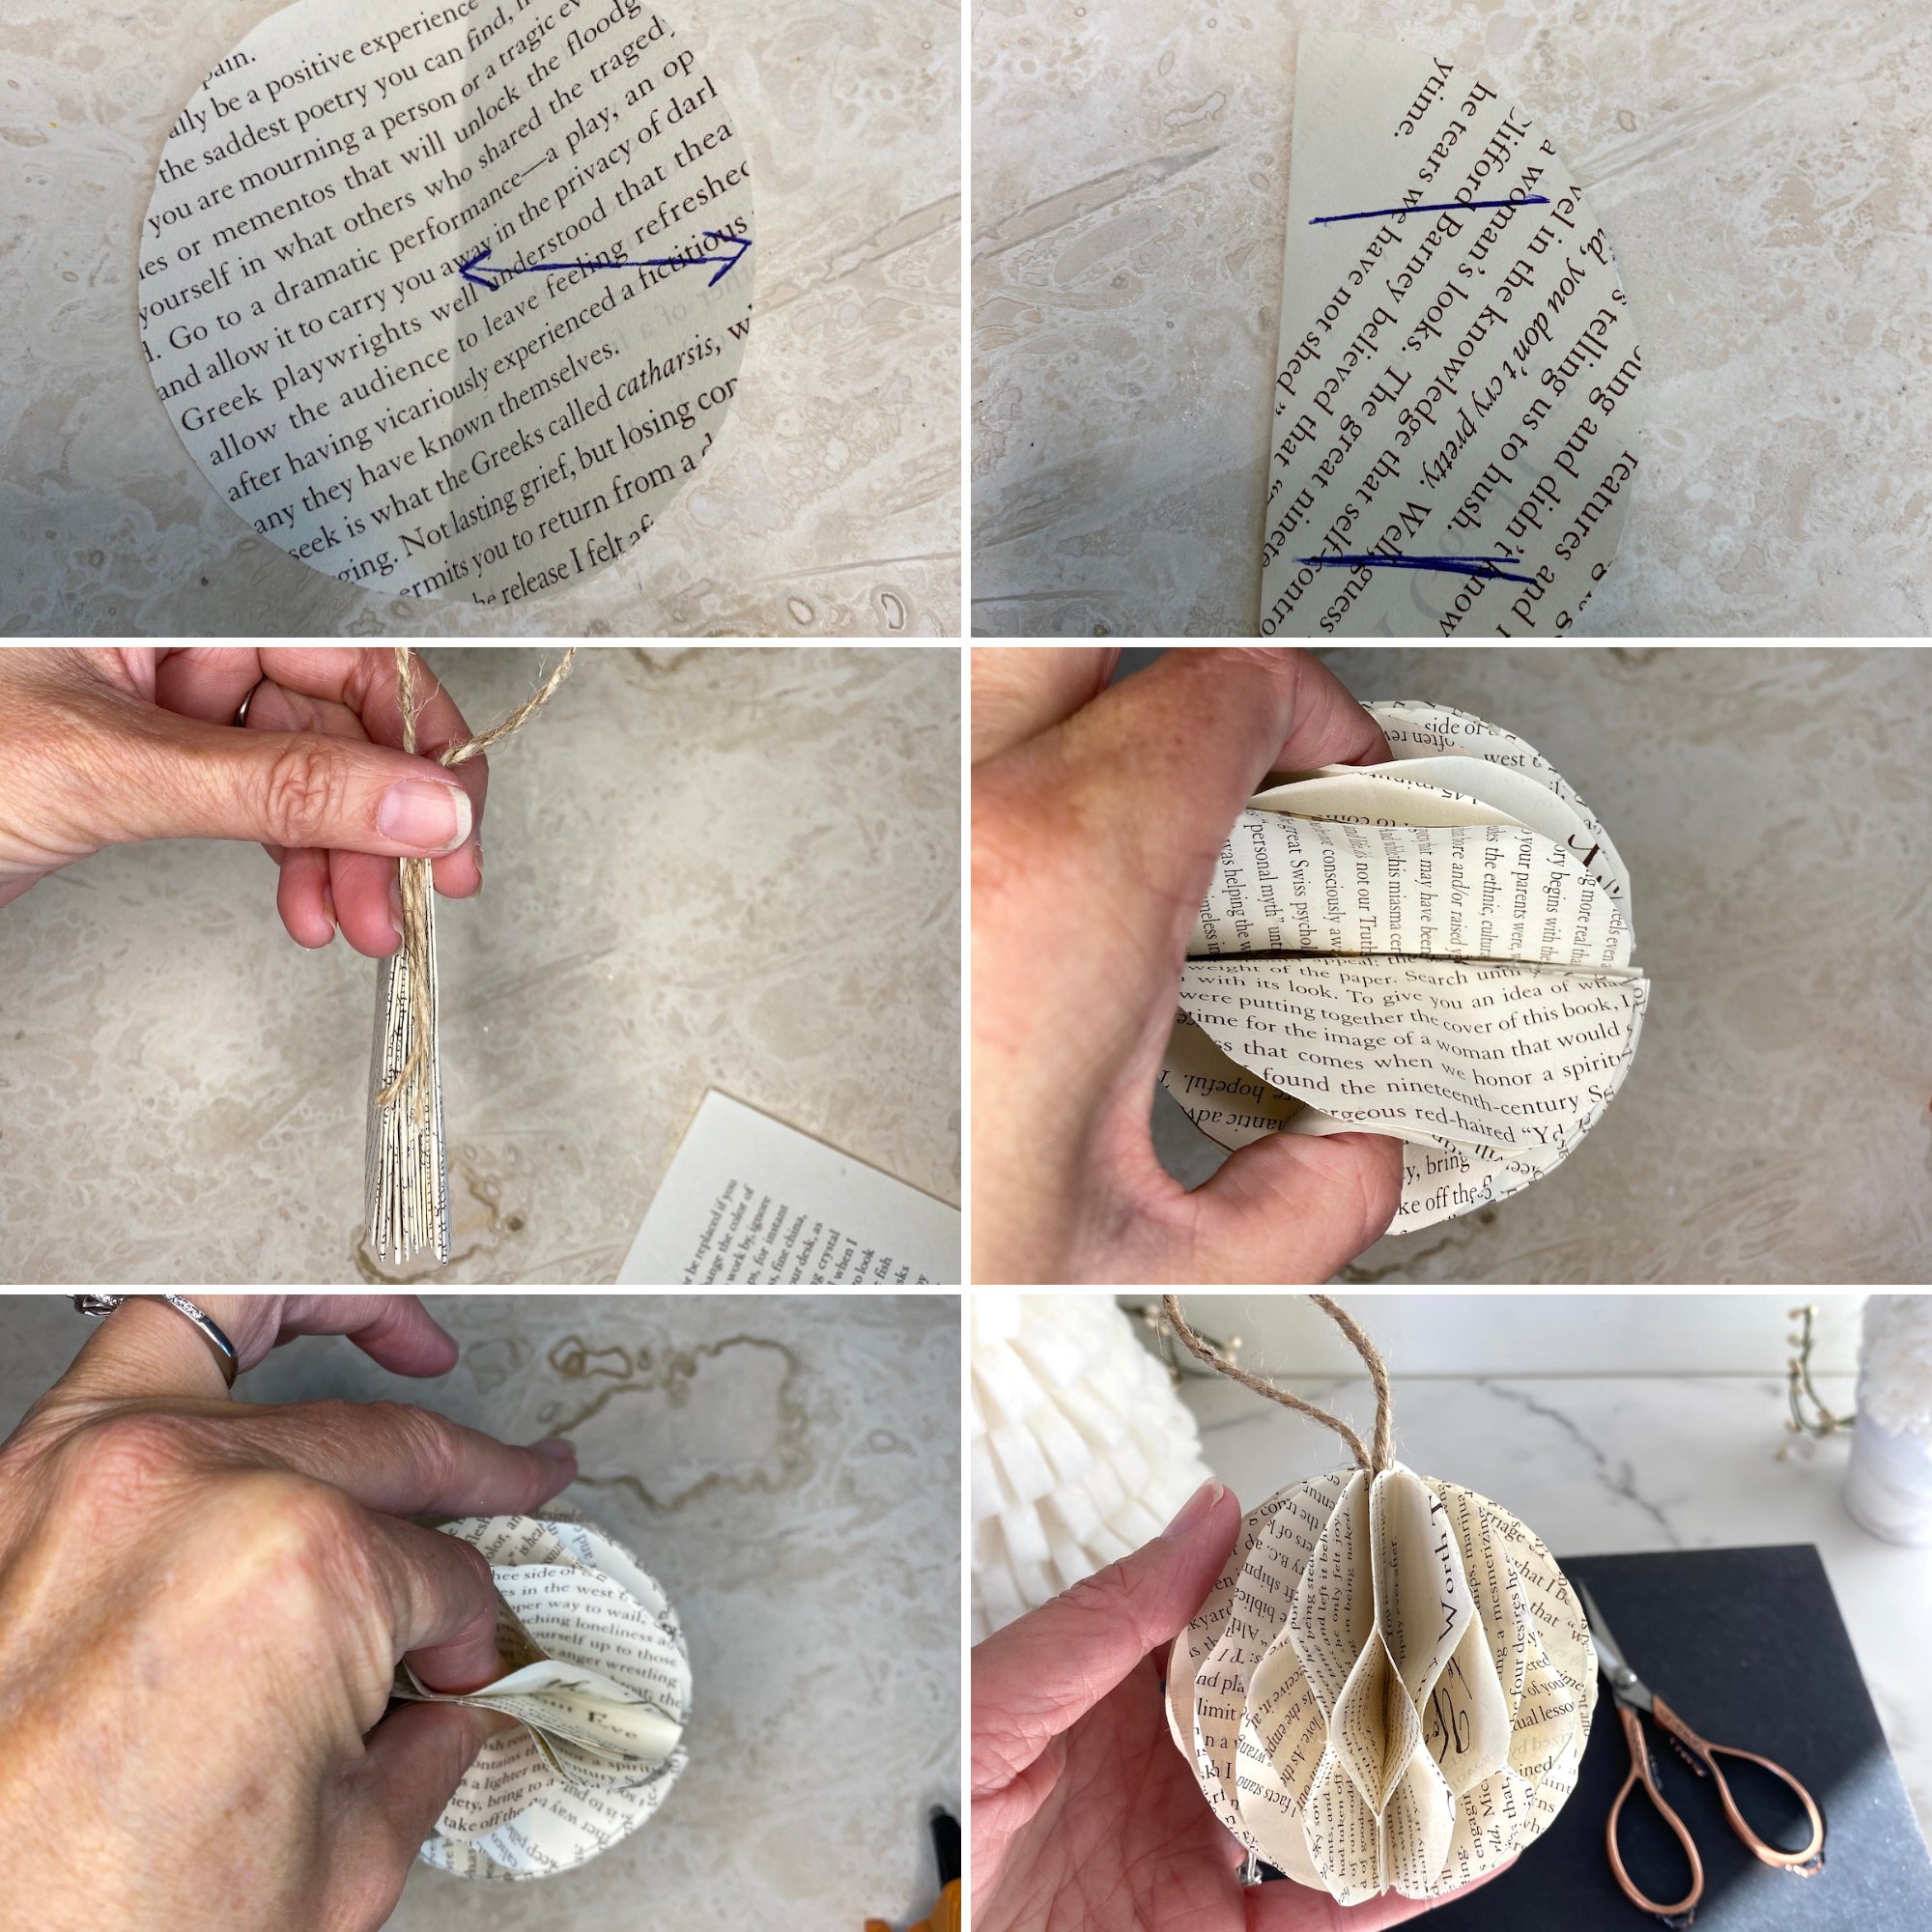 steps showing how to make paper ball ornaments